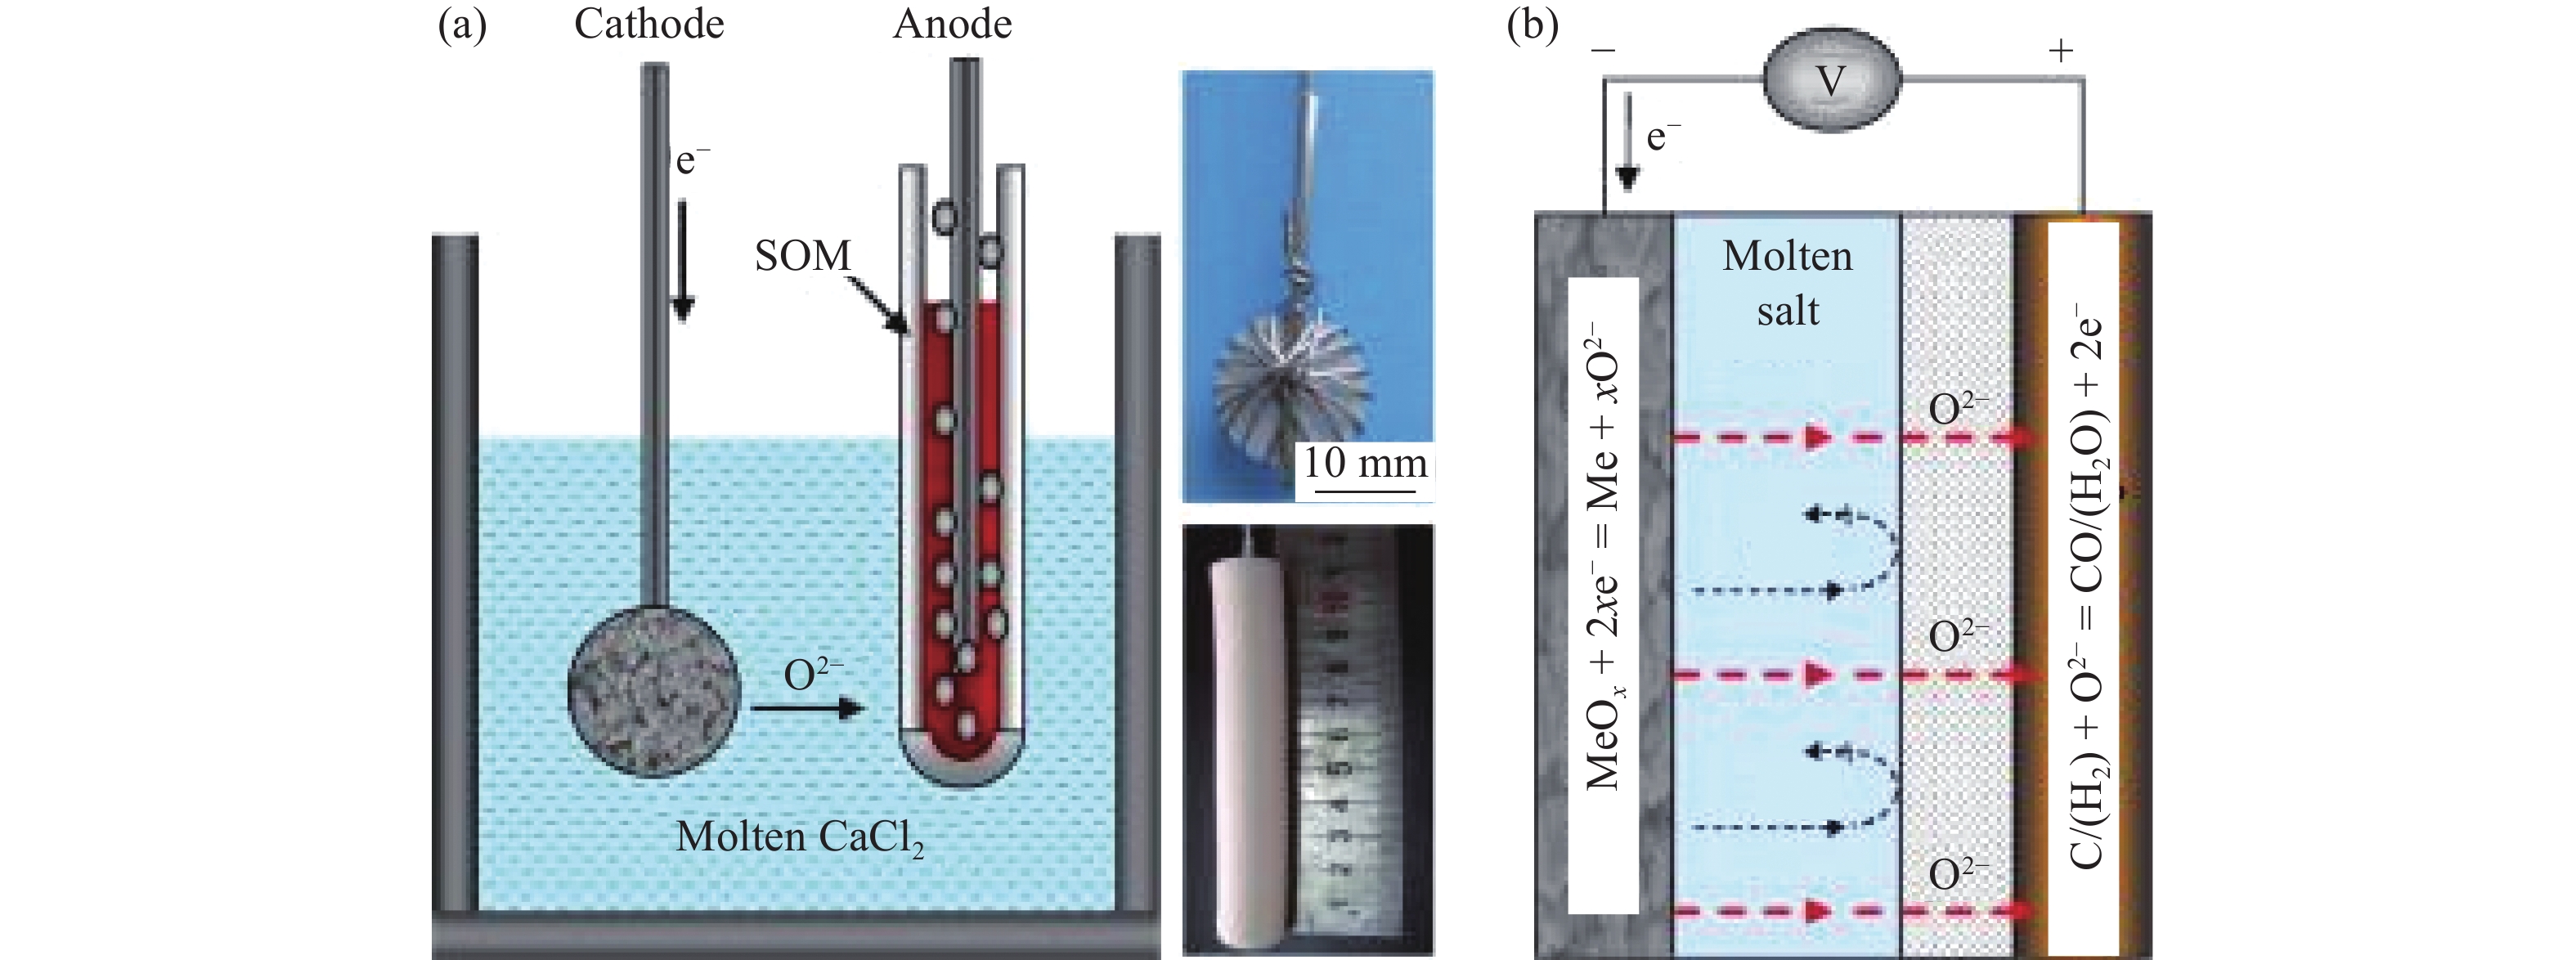 Scale-Up Study of Molten Salt Electrolysis using Cu or Ag Cathode and  Vacuum Distillation for the Production of High-Purity Mg Metal from MgO